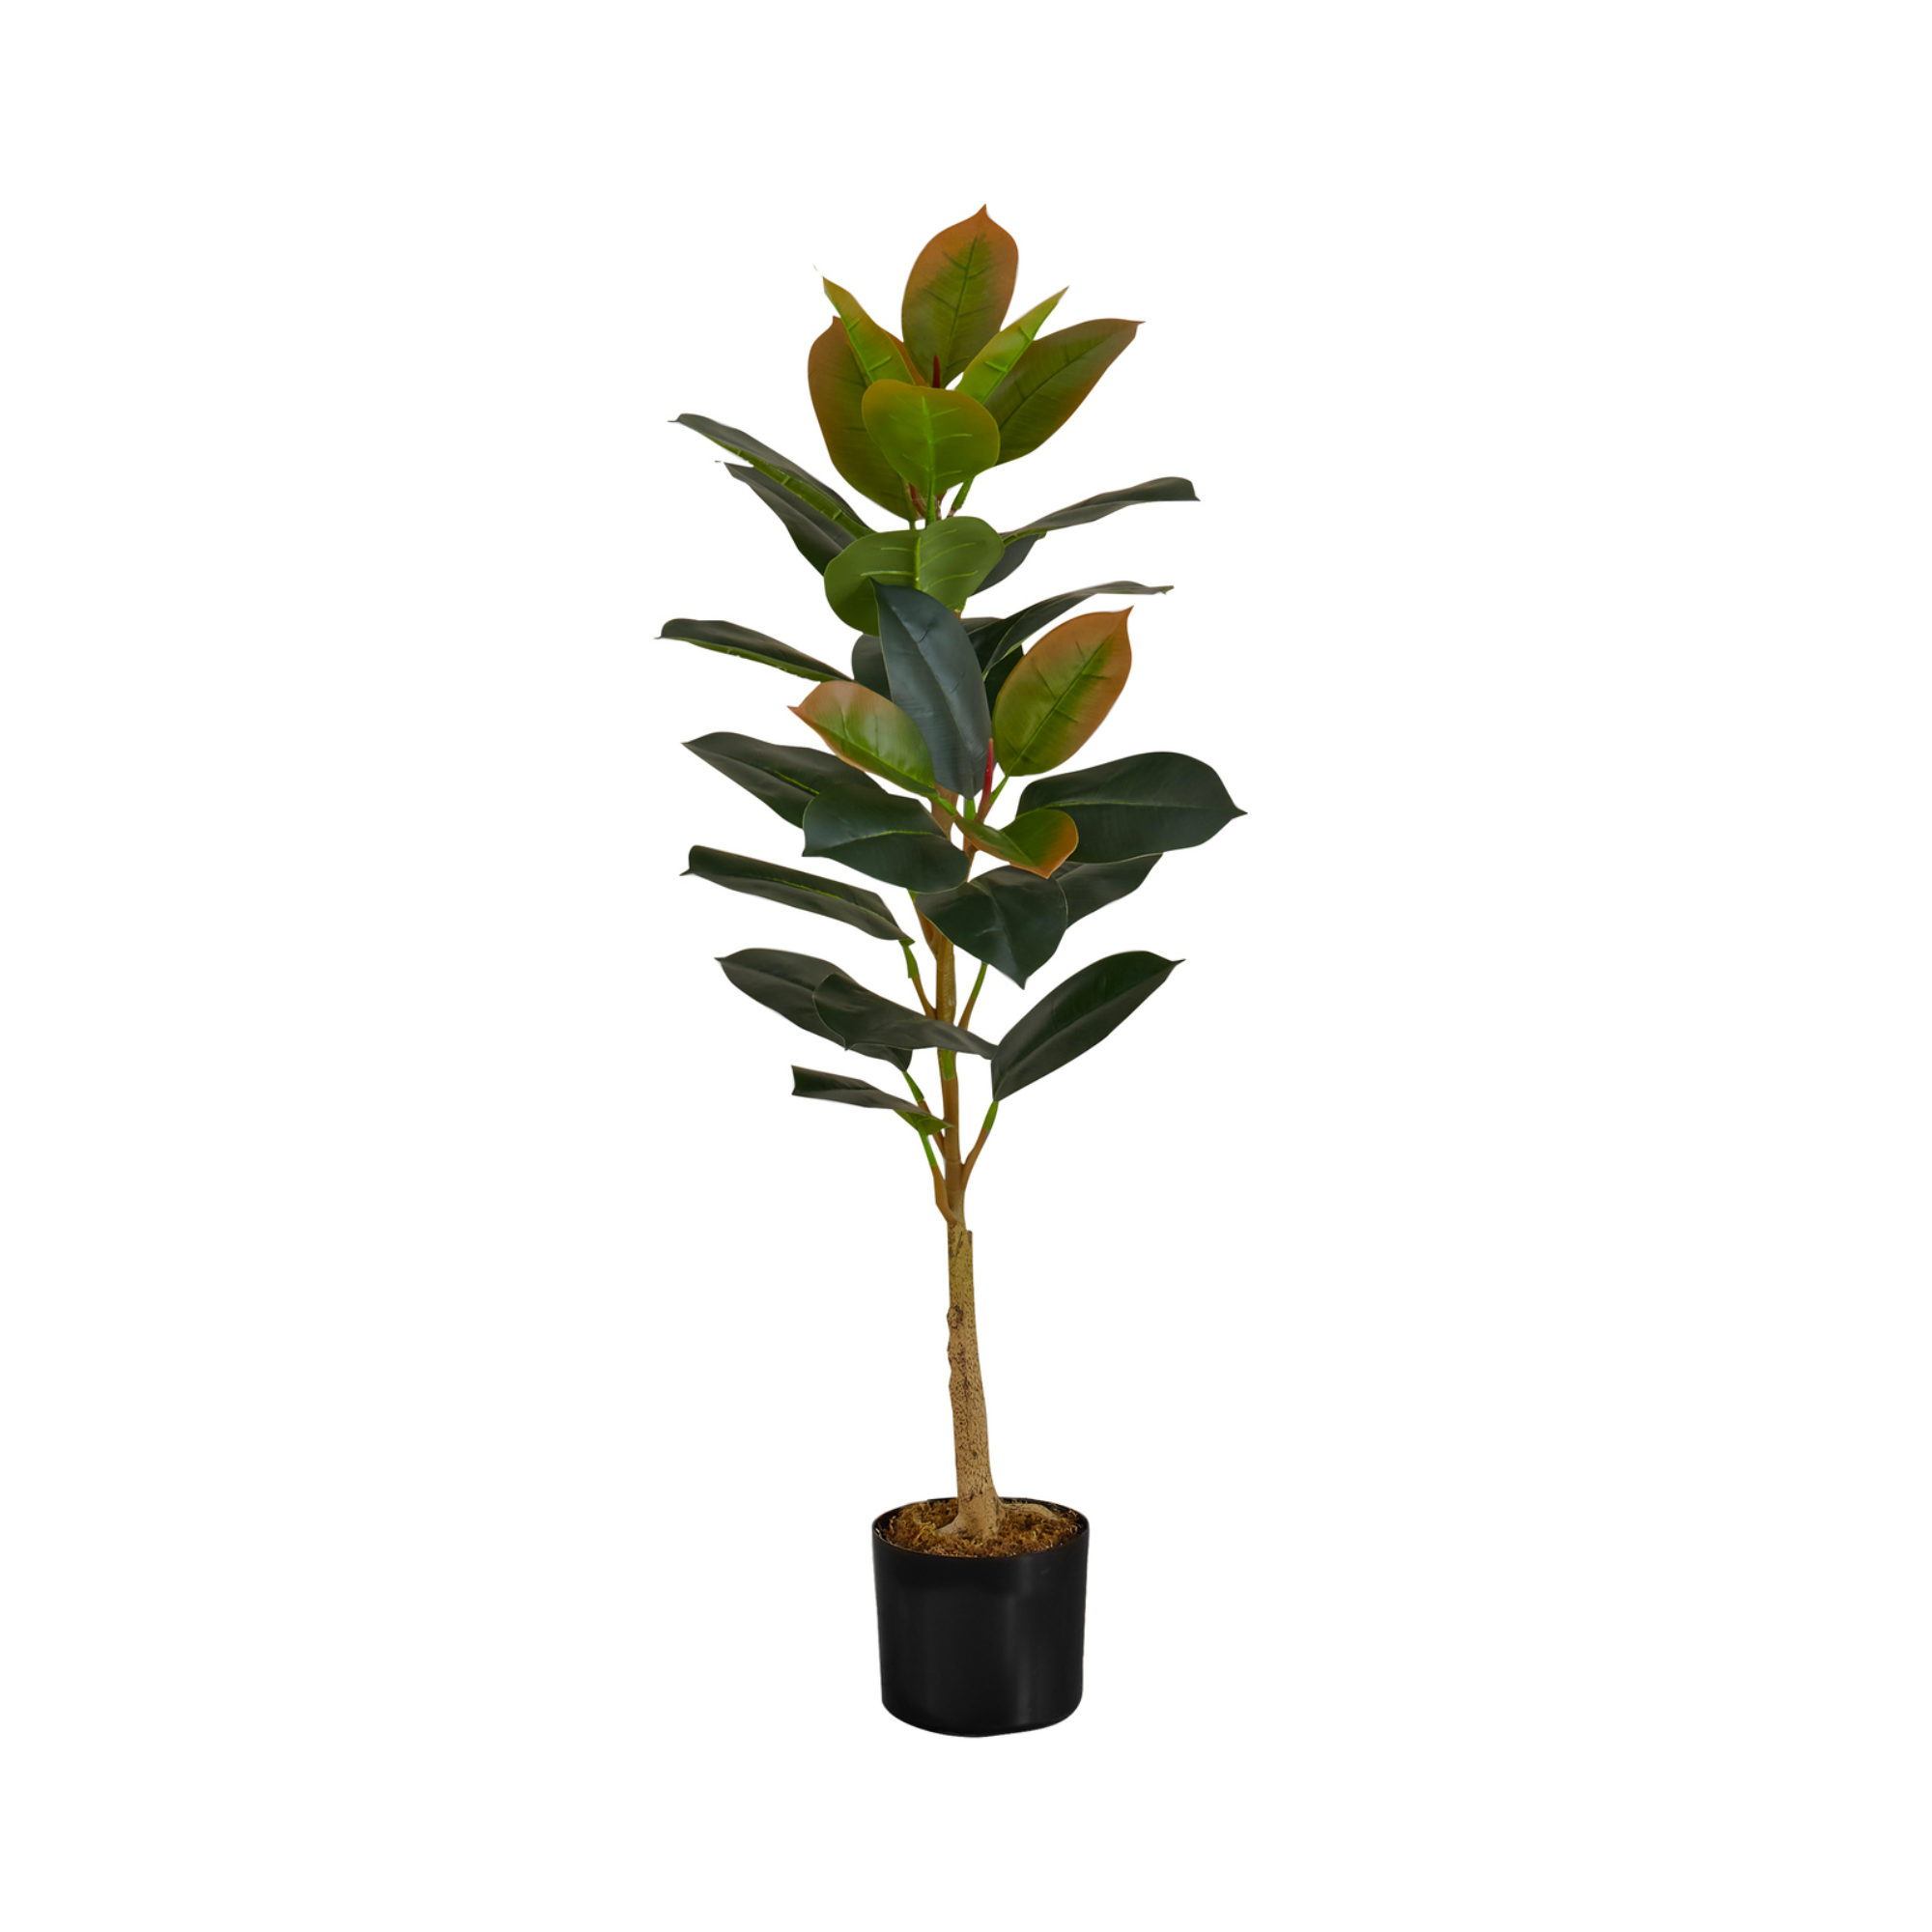 ARTIFICIAL PLANT - 40"H / INDOOR RUBBER TREE IN A 5" POT